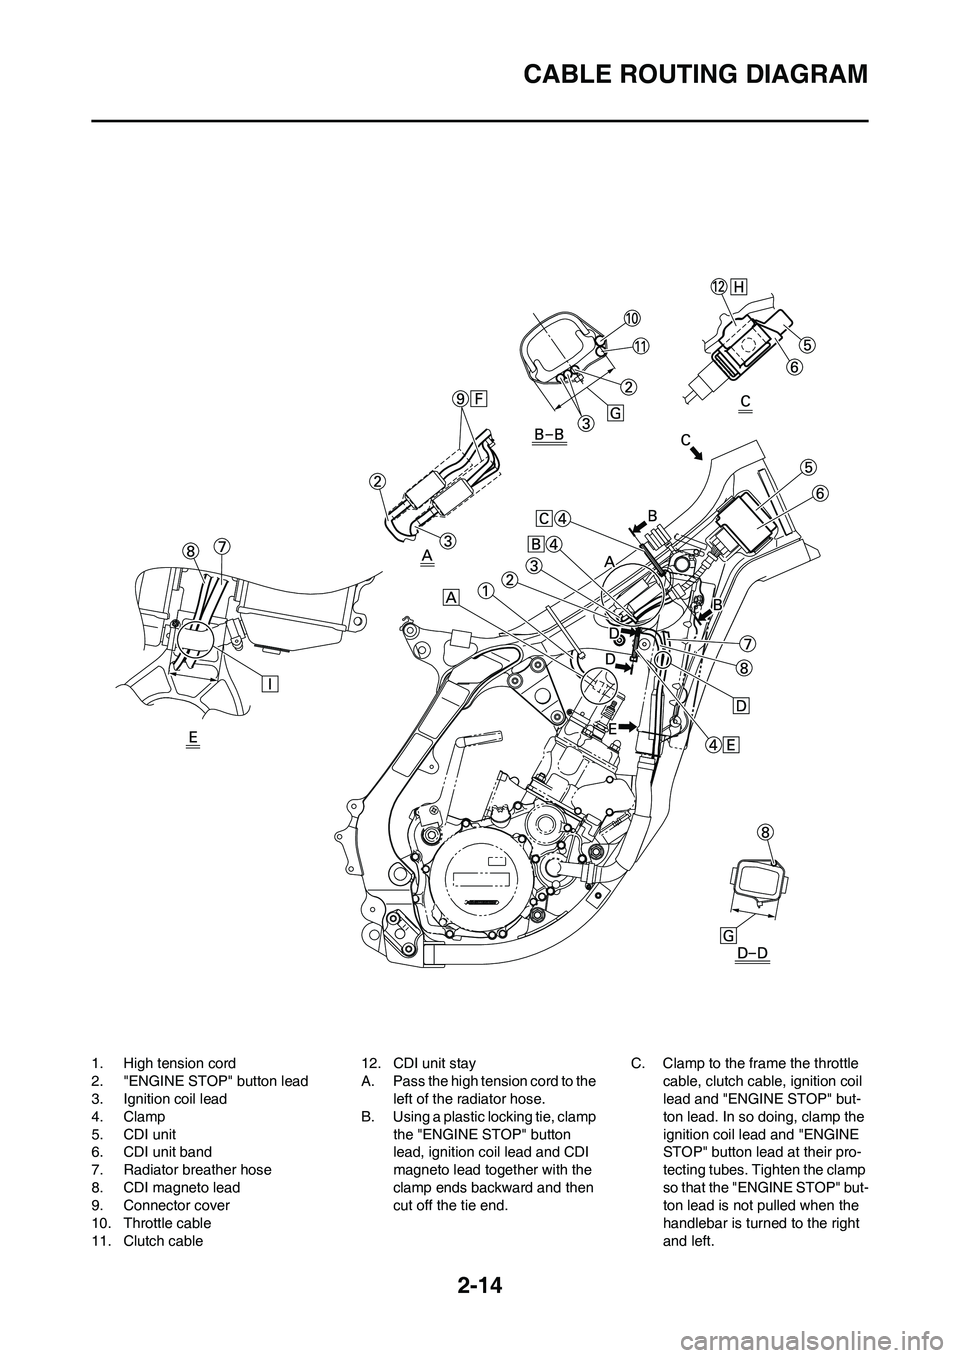 YAMAHA YZ125LC 2010 User Guide 2-14
CABLE ROUTING DIAGRAM
1. High tension cord
2. "ENGINE STOP" button lead
3. Ignition coil lead
4. Clamp
5. CDI unit
6. CDI unit band
7. Radiator breather hose
8. CDI magneto lead
9. Connector cove